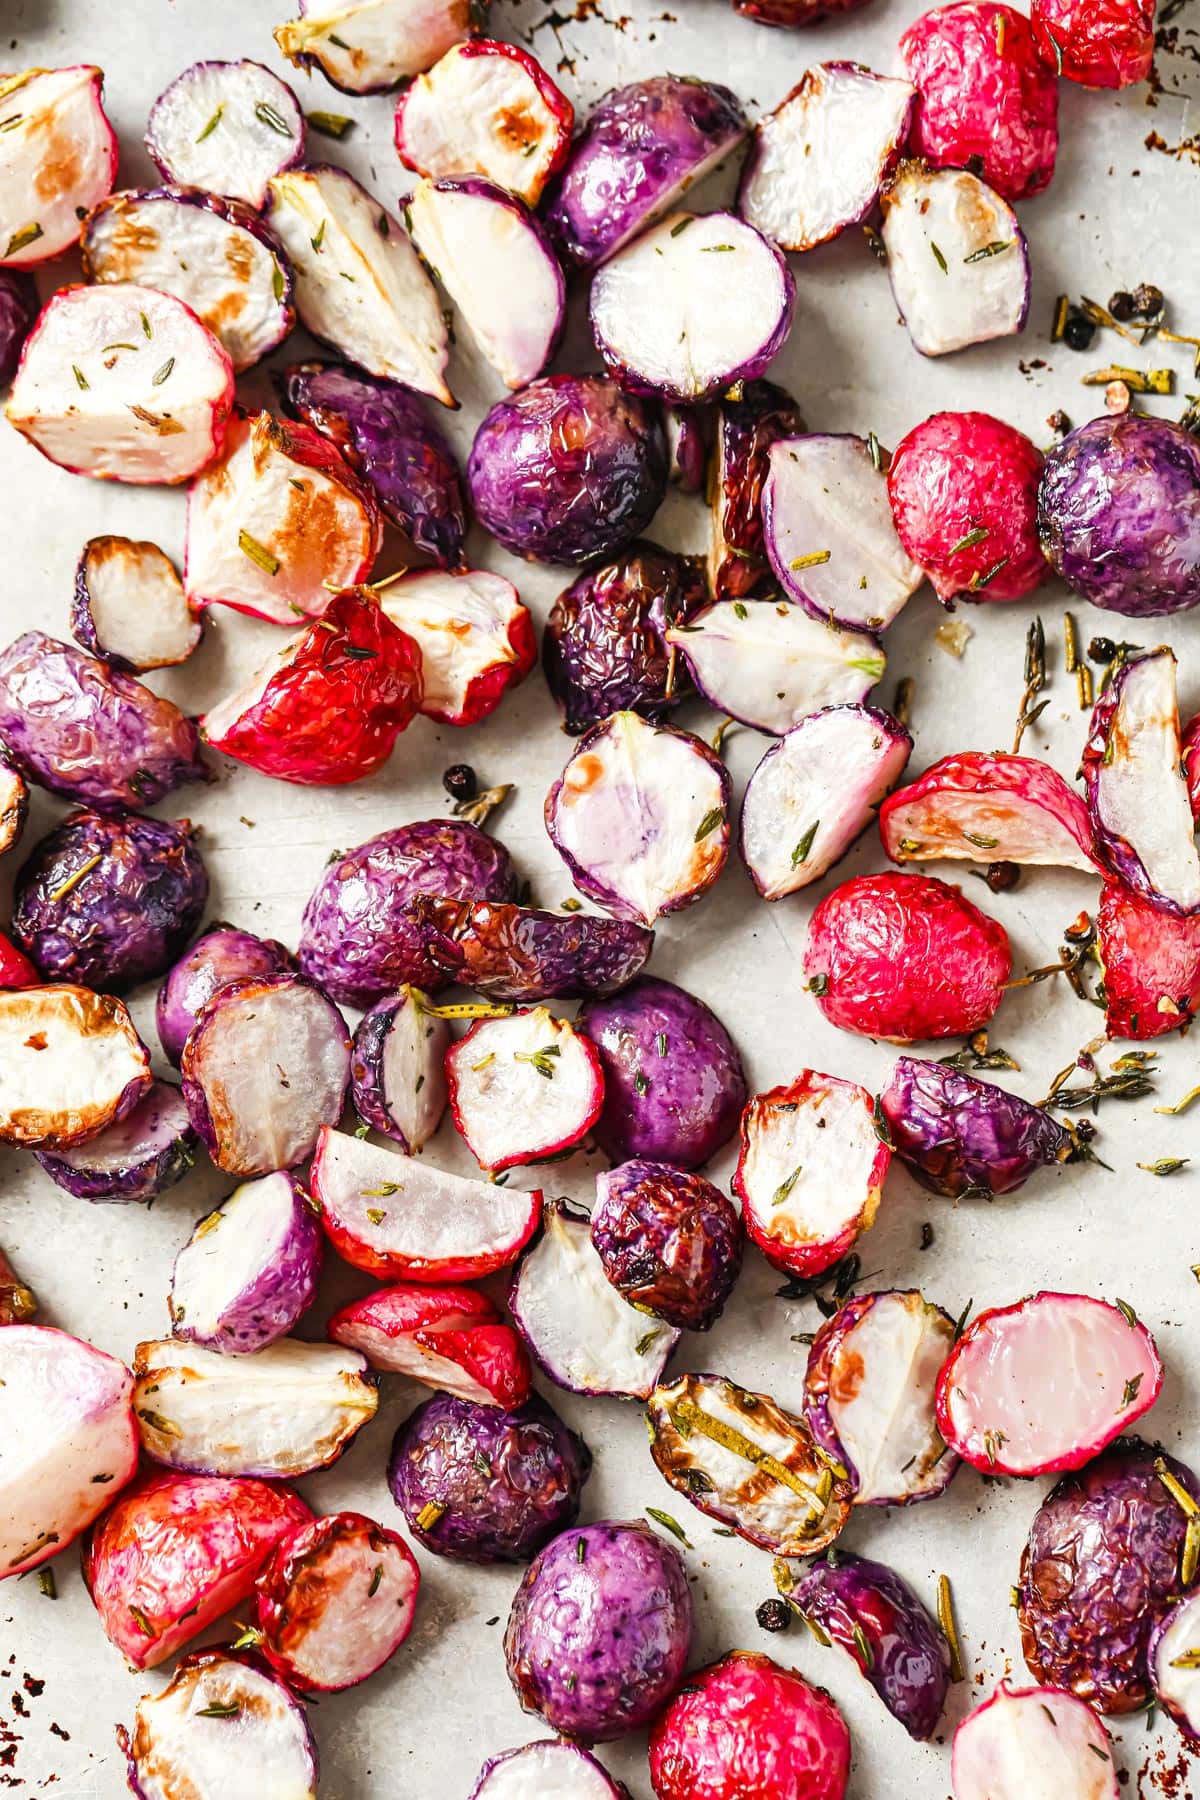 Roasted radishes with herbs.